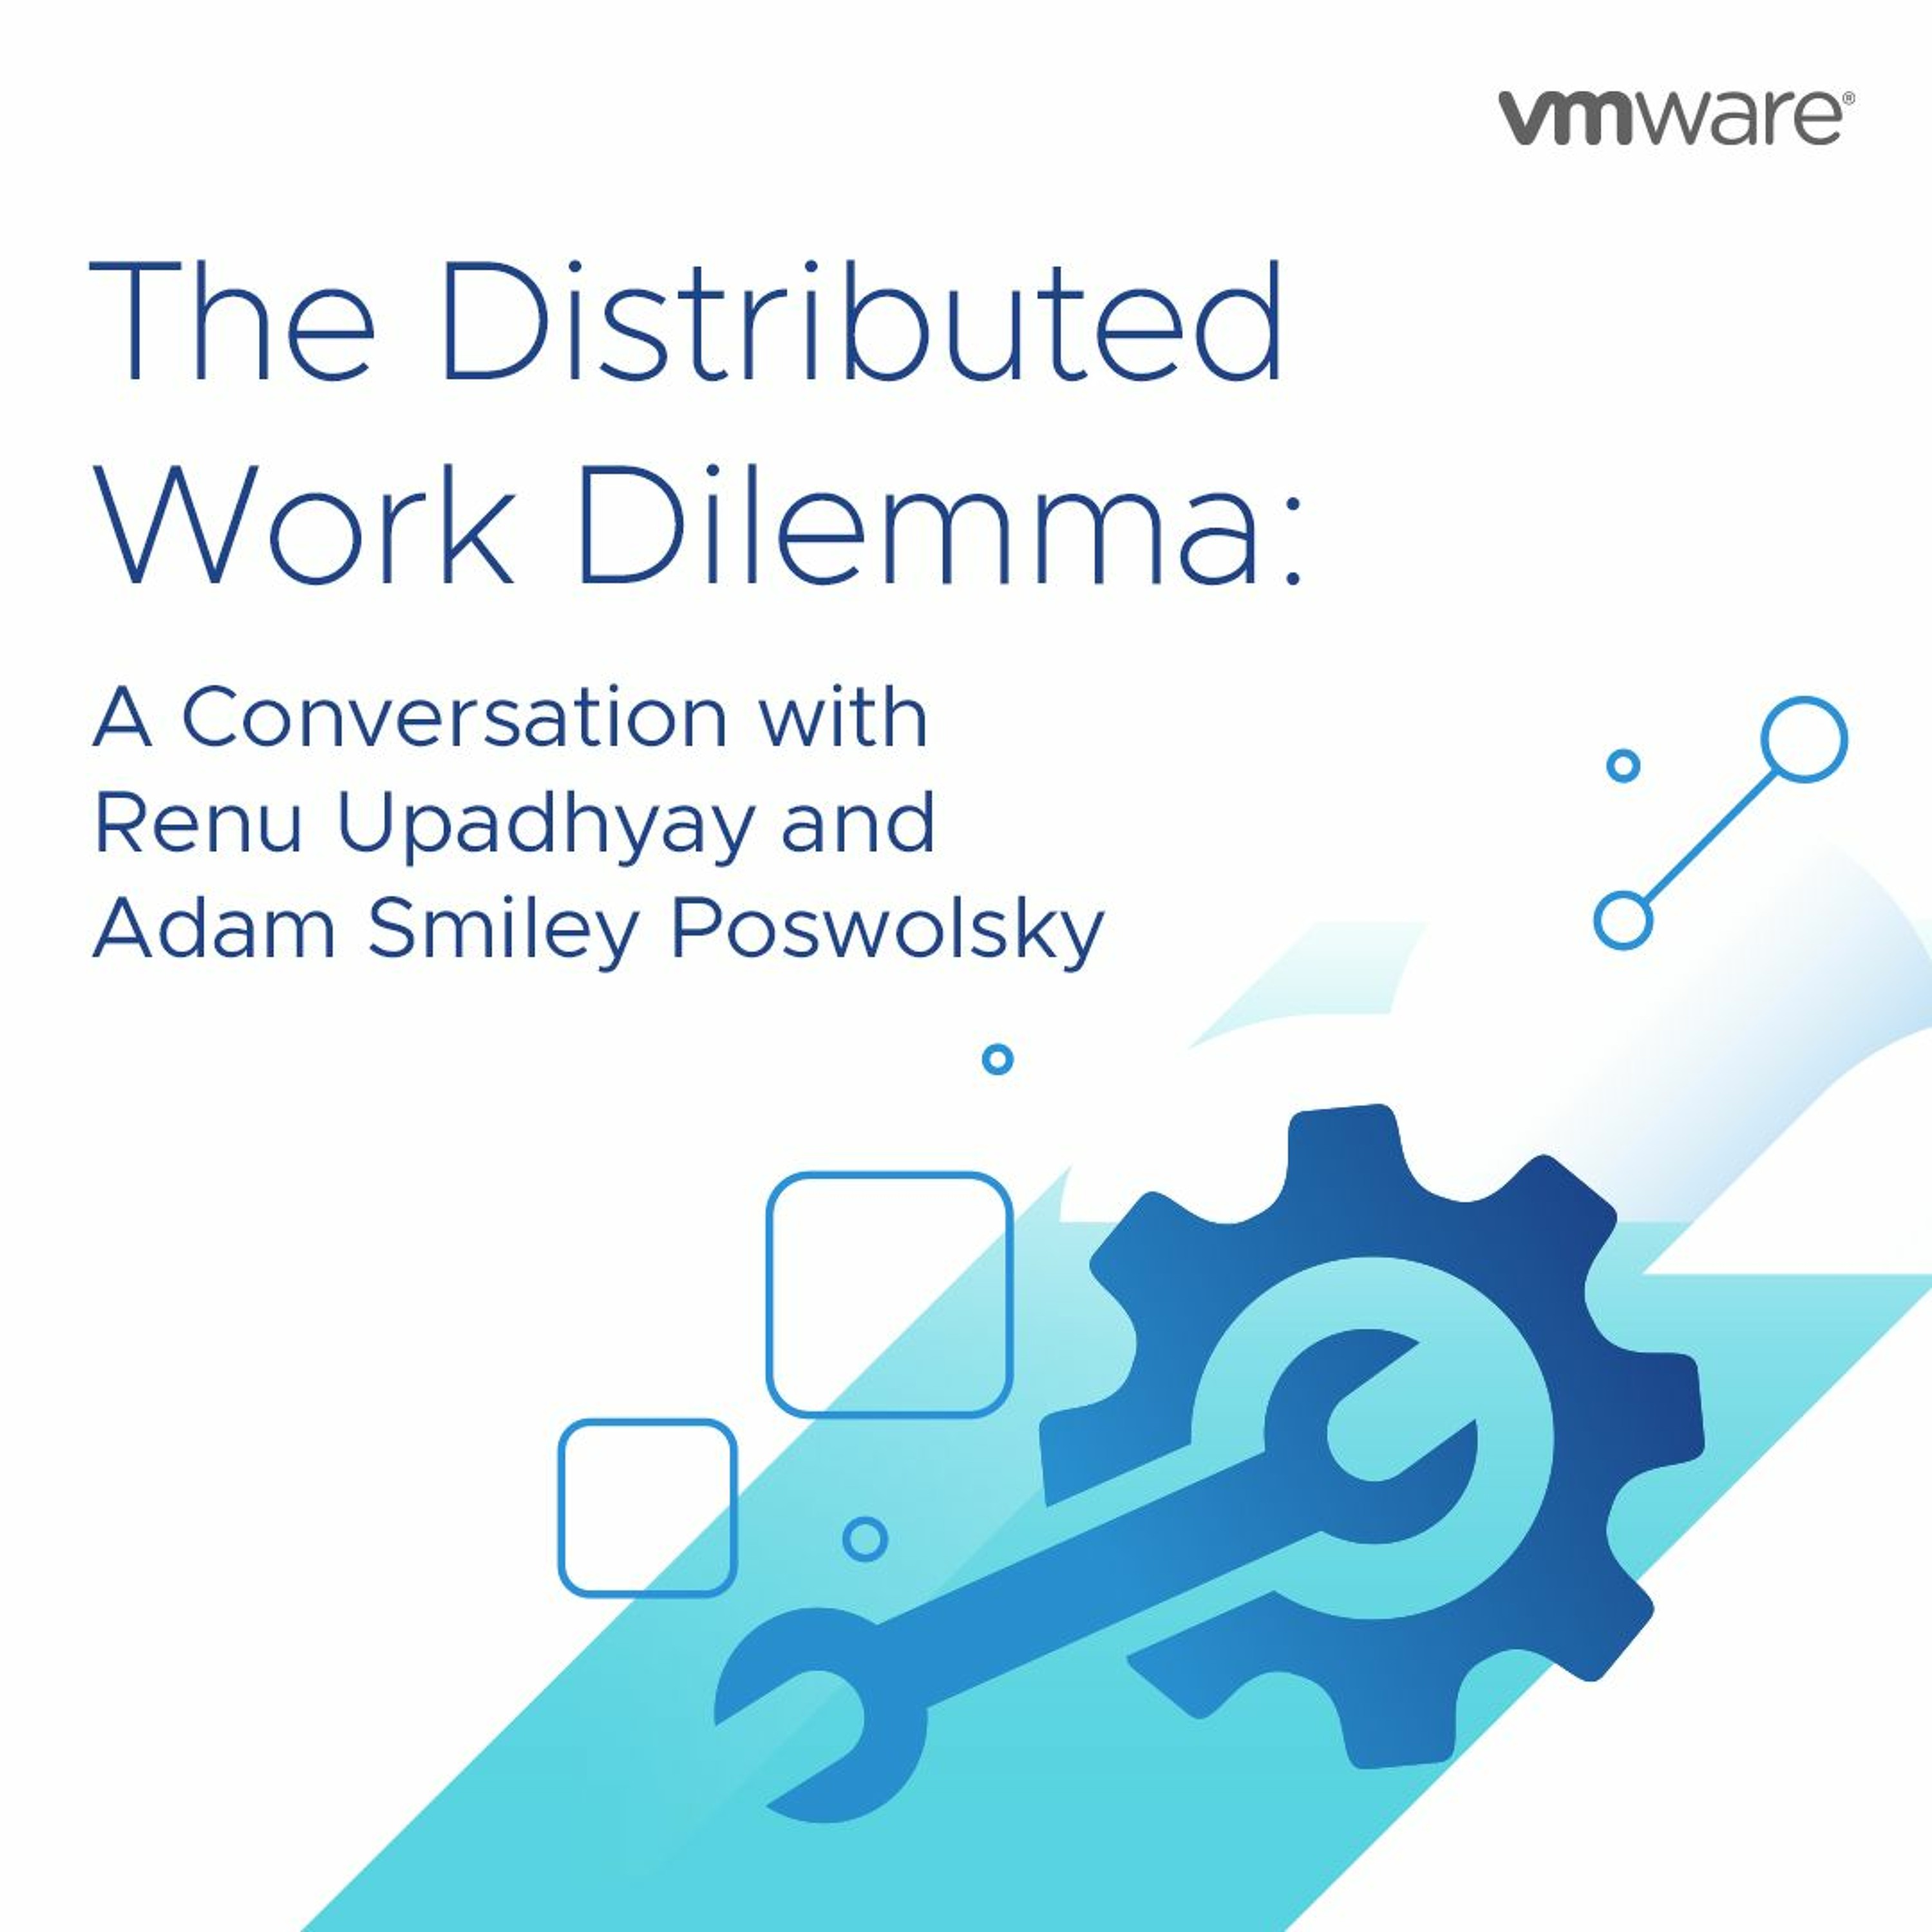 The Future of Work S1 E1: The Distributed Work Dilemma